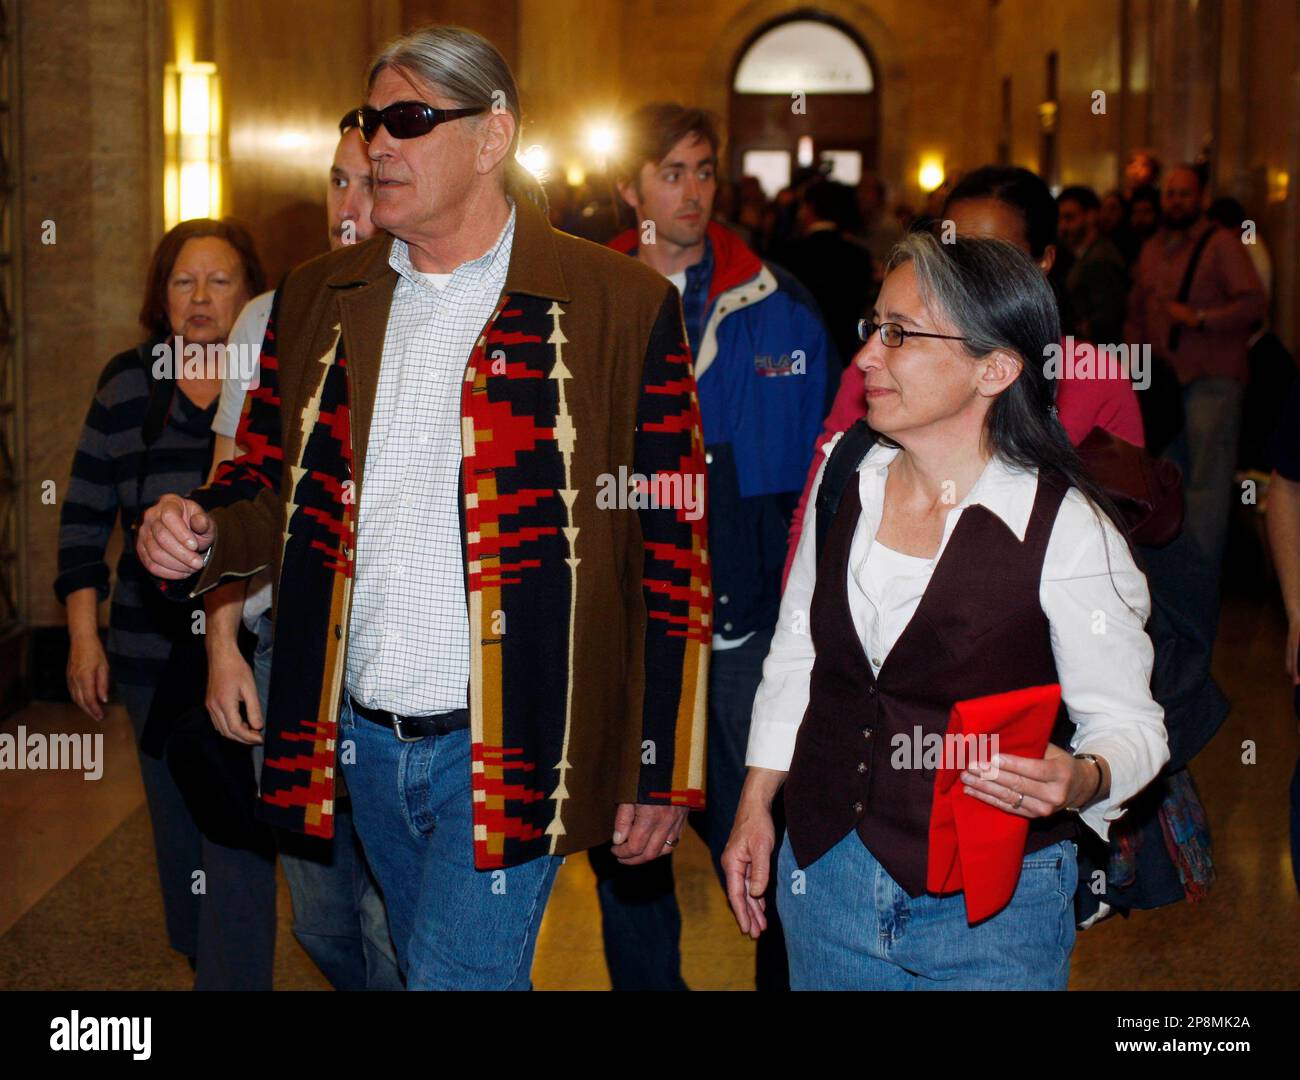 Ward Churchill, who was a tenured professor of ethnic studies at the University of Colorado in Boulder, Colo., left, walks with his wife, Natsu Saito, and his supporters after a jury ruled that the professor was wrongly fired by school administrators, Thursday, April 2, 2009 in Denver.. Churchill maintained that he was dismissed in retaliation for his comments about victims of the Sept. 11, 2001, attack on the United States. (AP Photo/David Zalubowski) Stock Photo